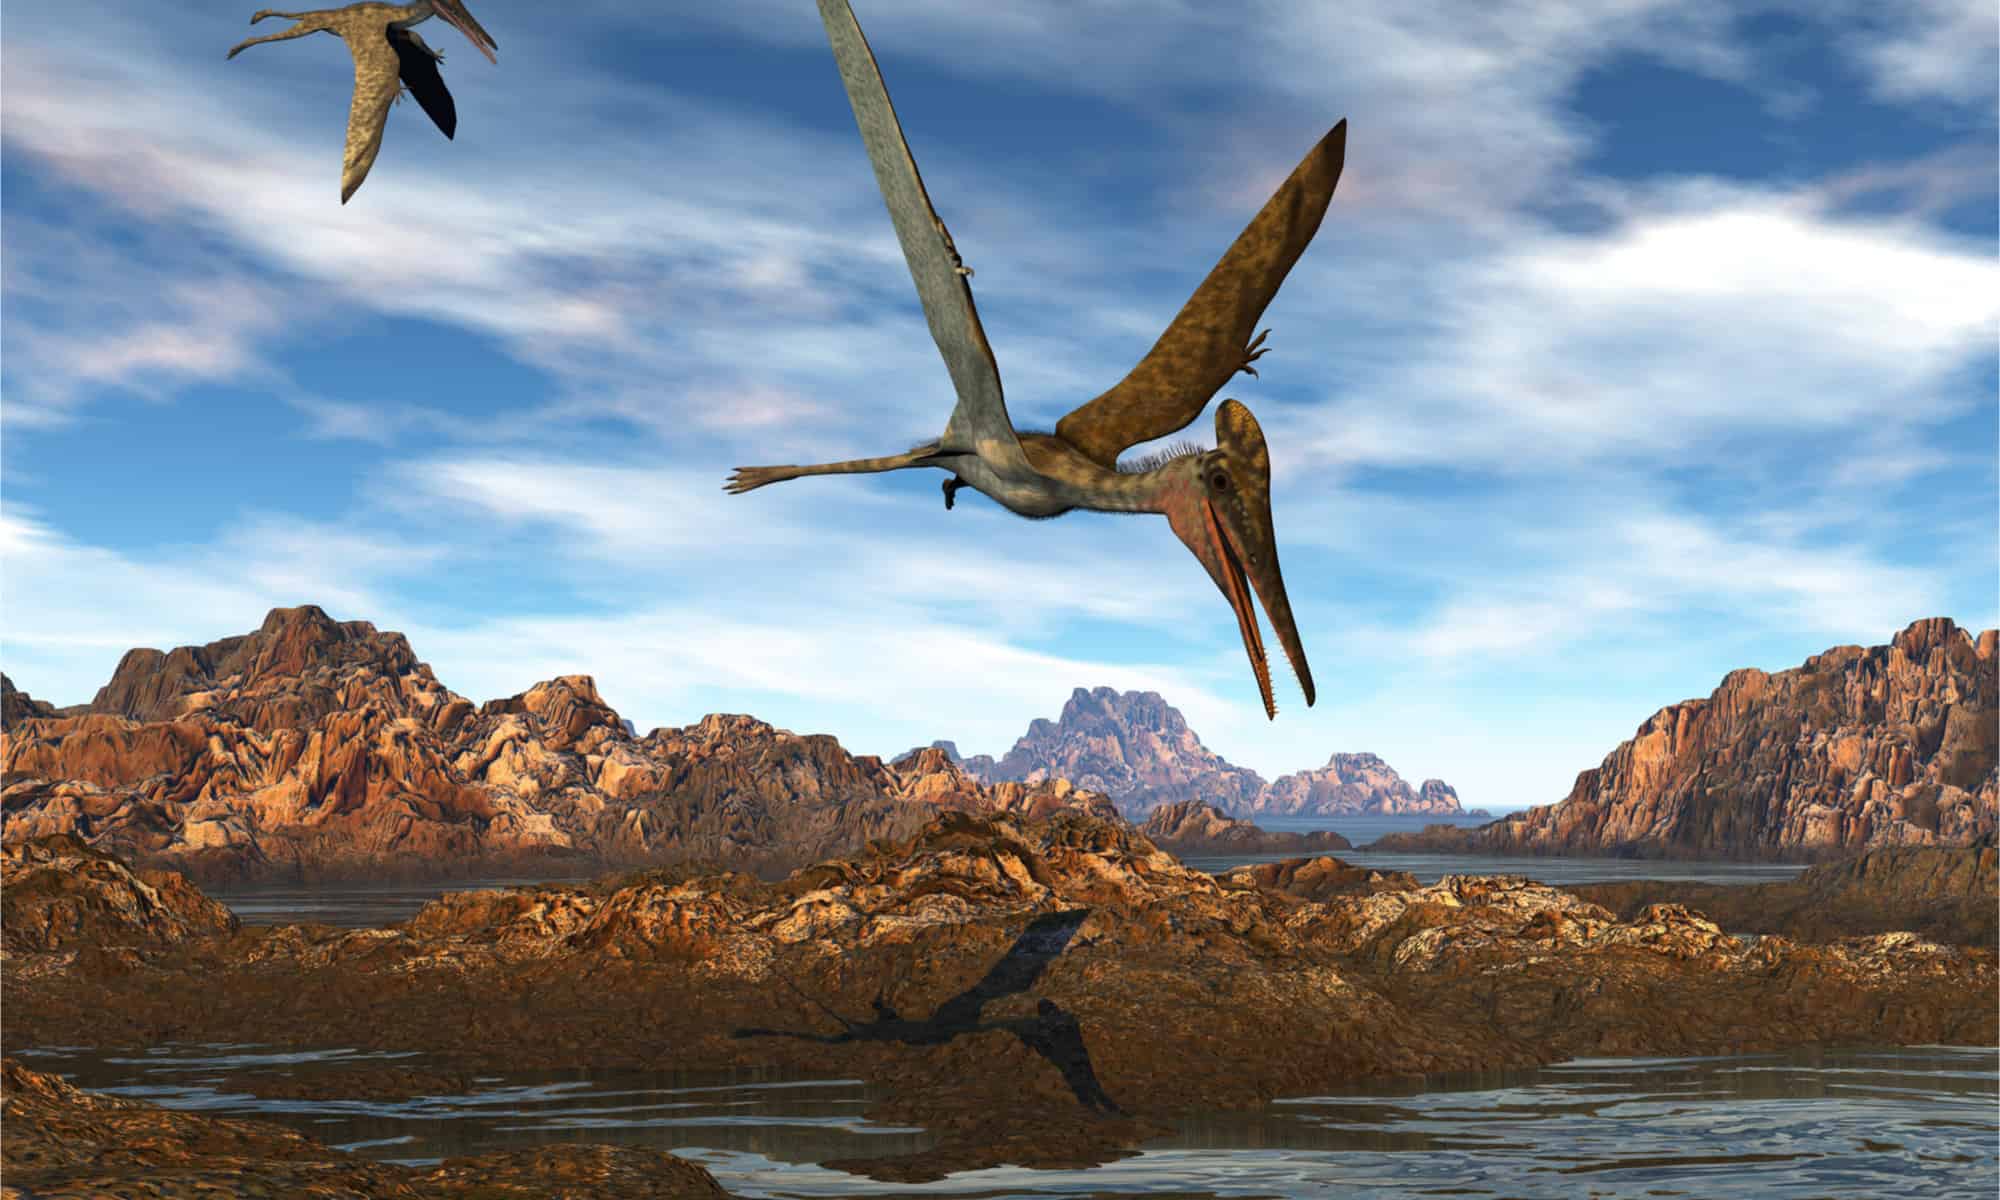 Illustration of Pterodactyls flying over water